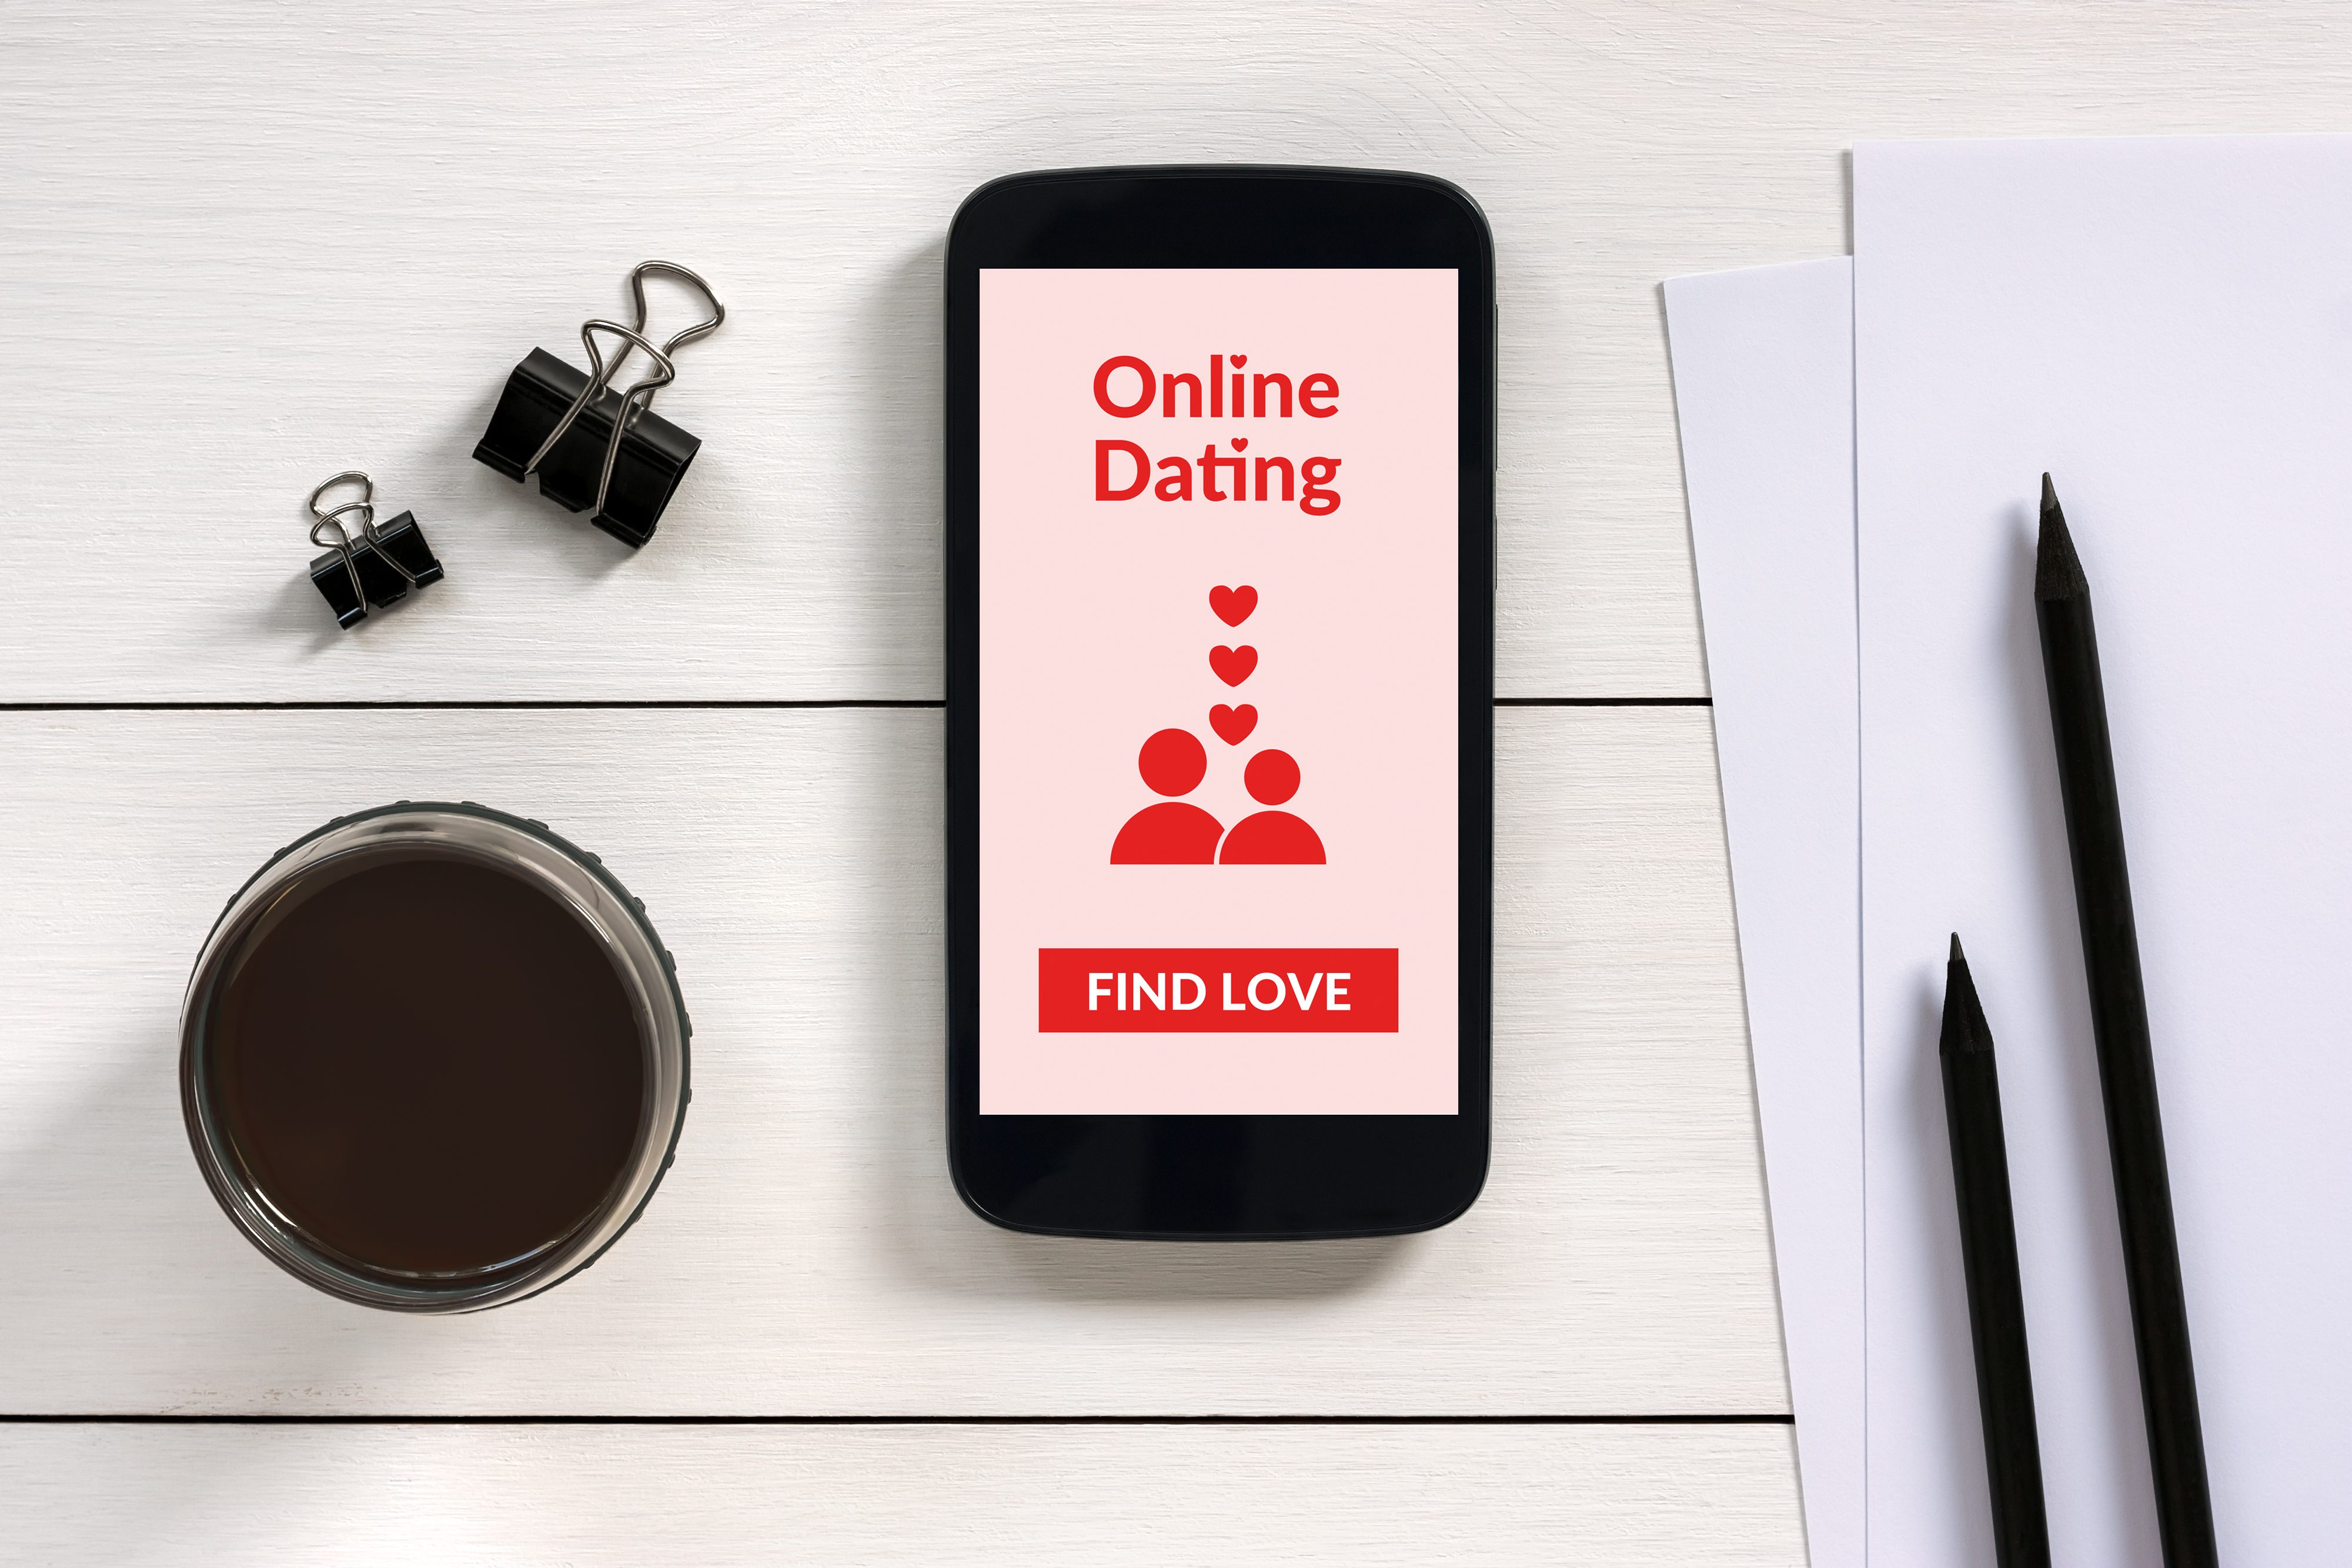 What Should I Do? Should I Stick To Online Dating?